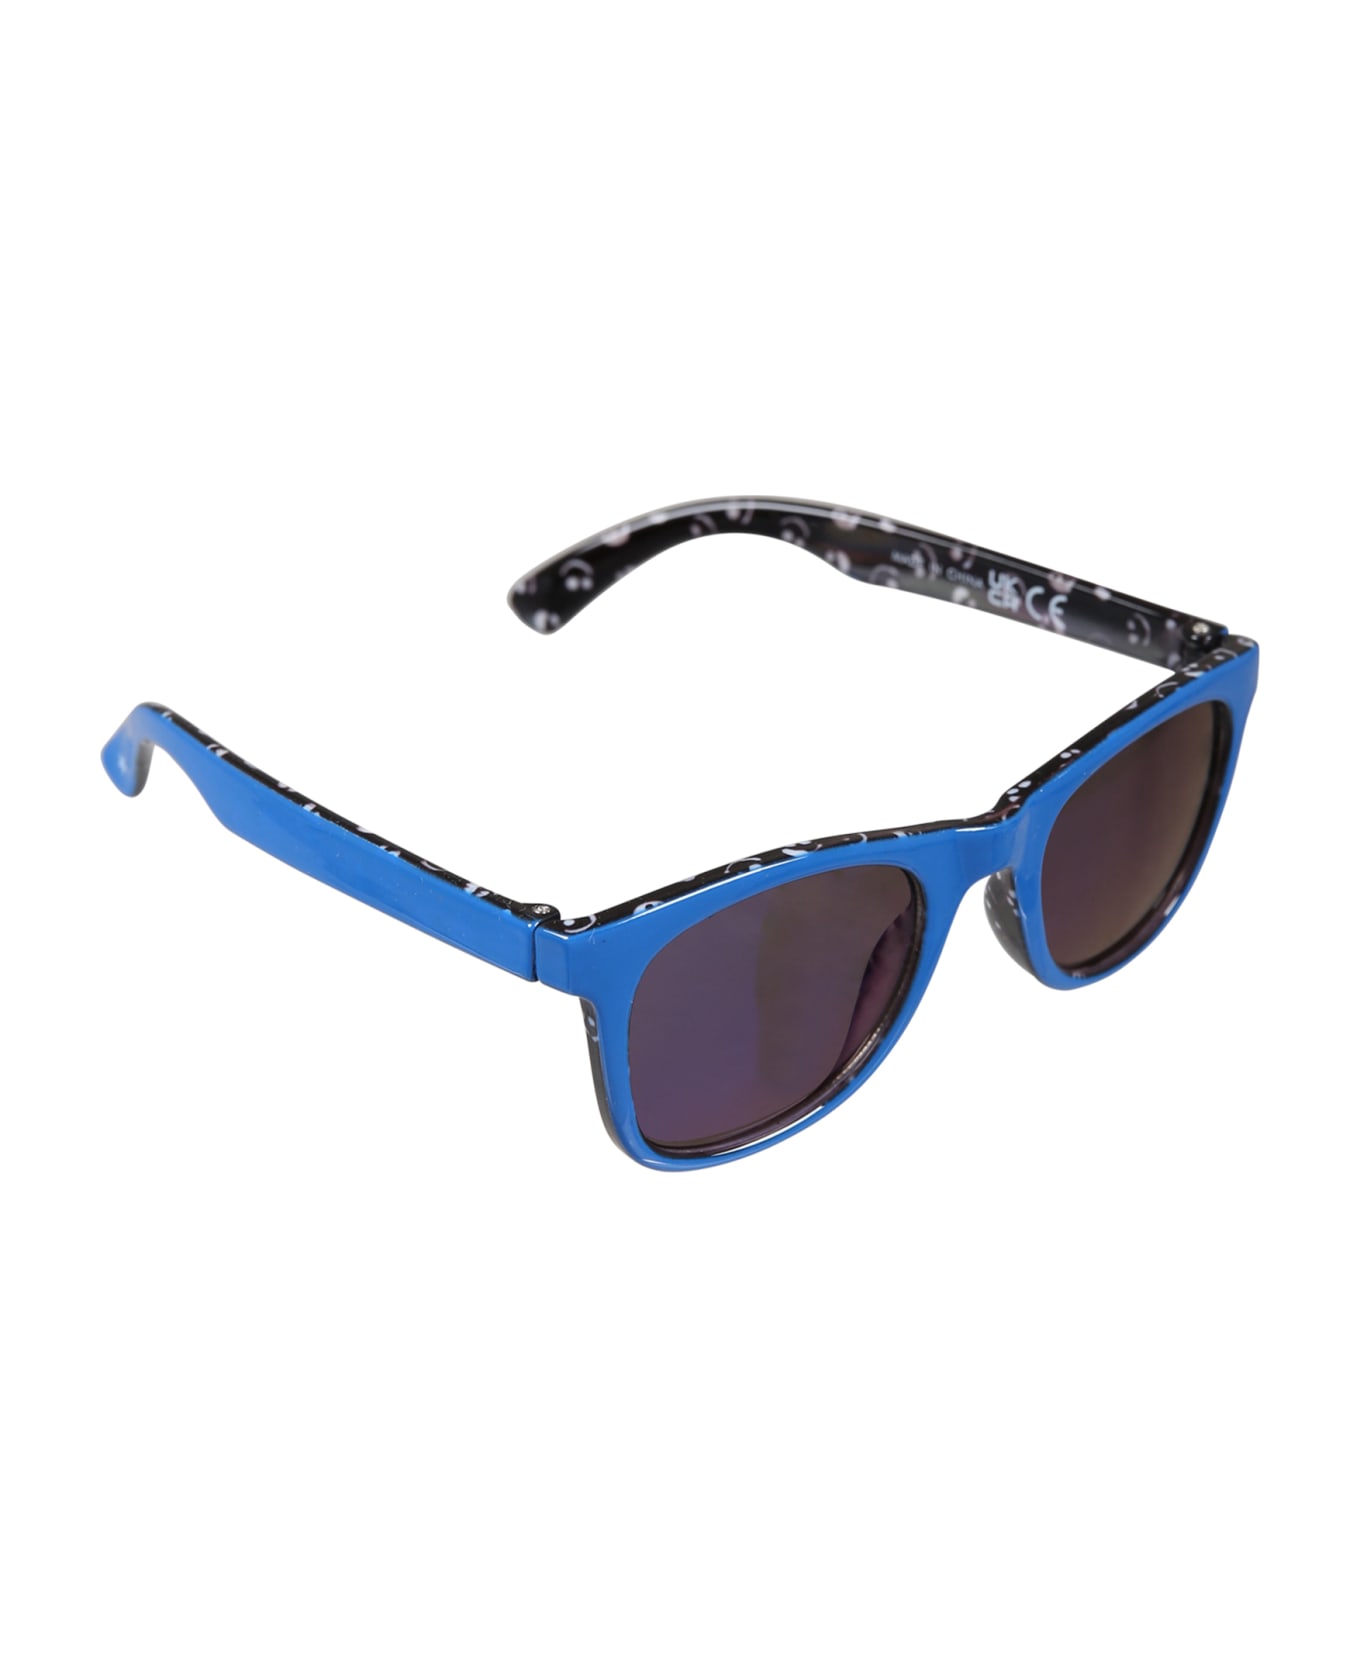 Molo Blue Smile Sunglasses For Boy - Blue アクセサリー＆ギフト